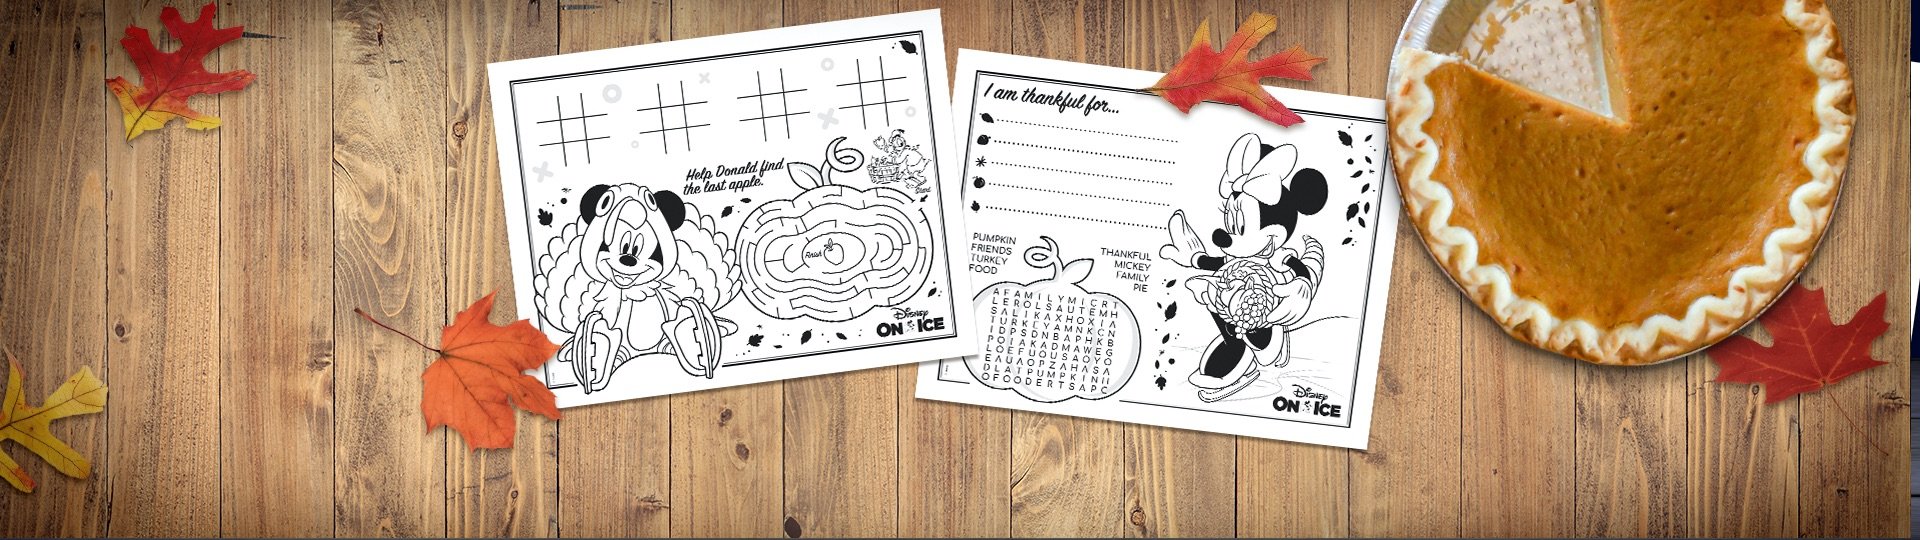 ACTIVITY PLACEMATS